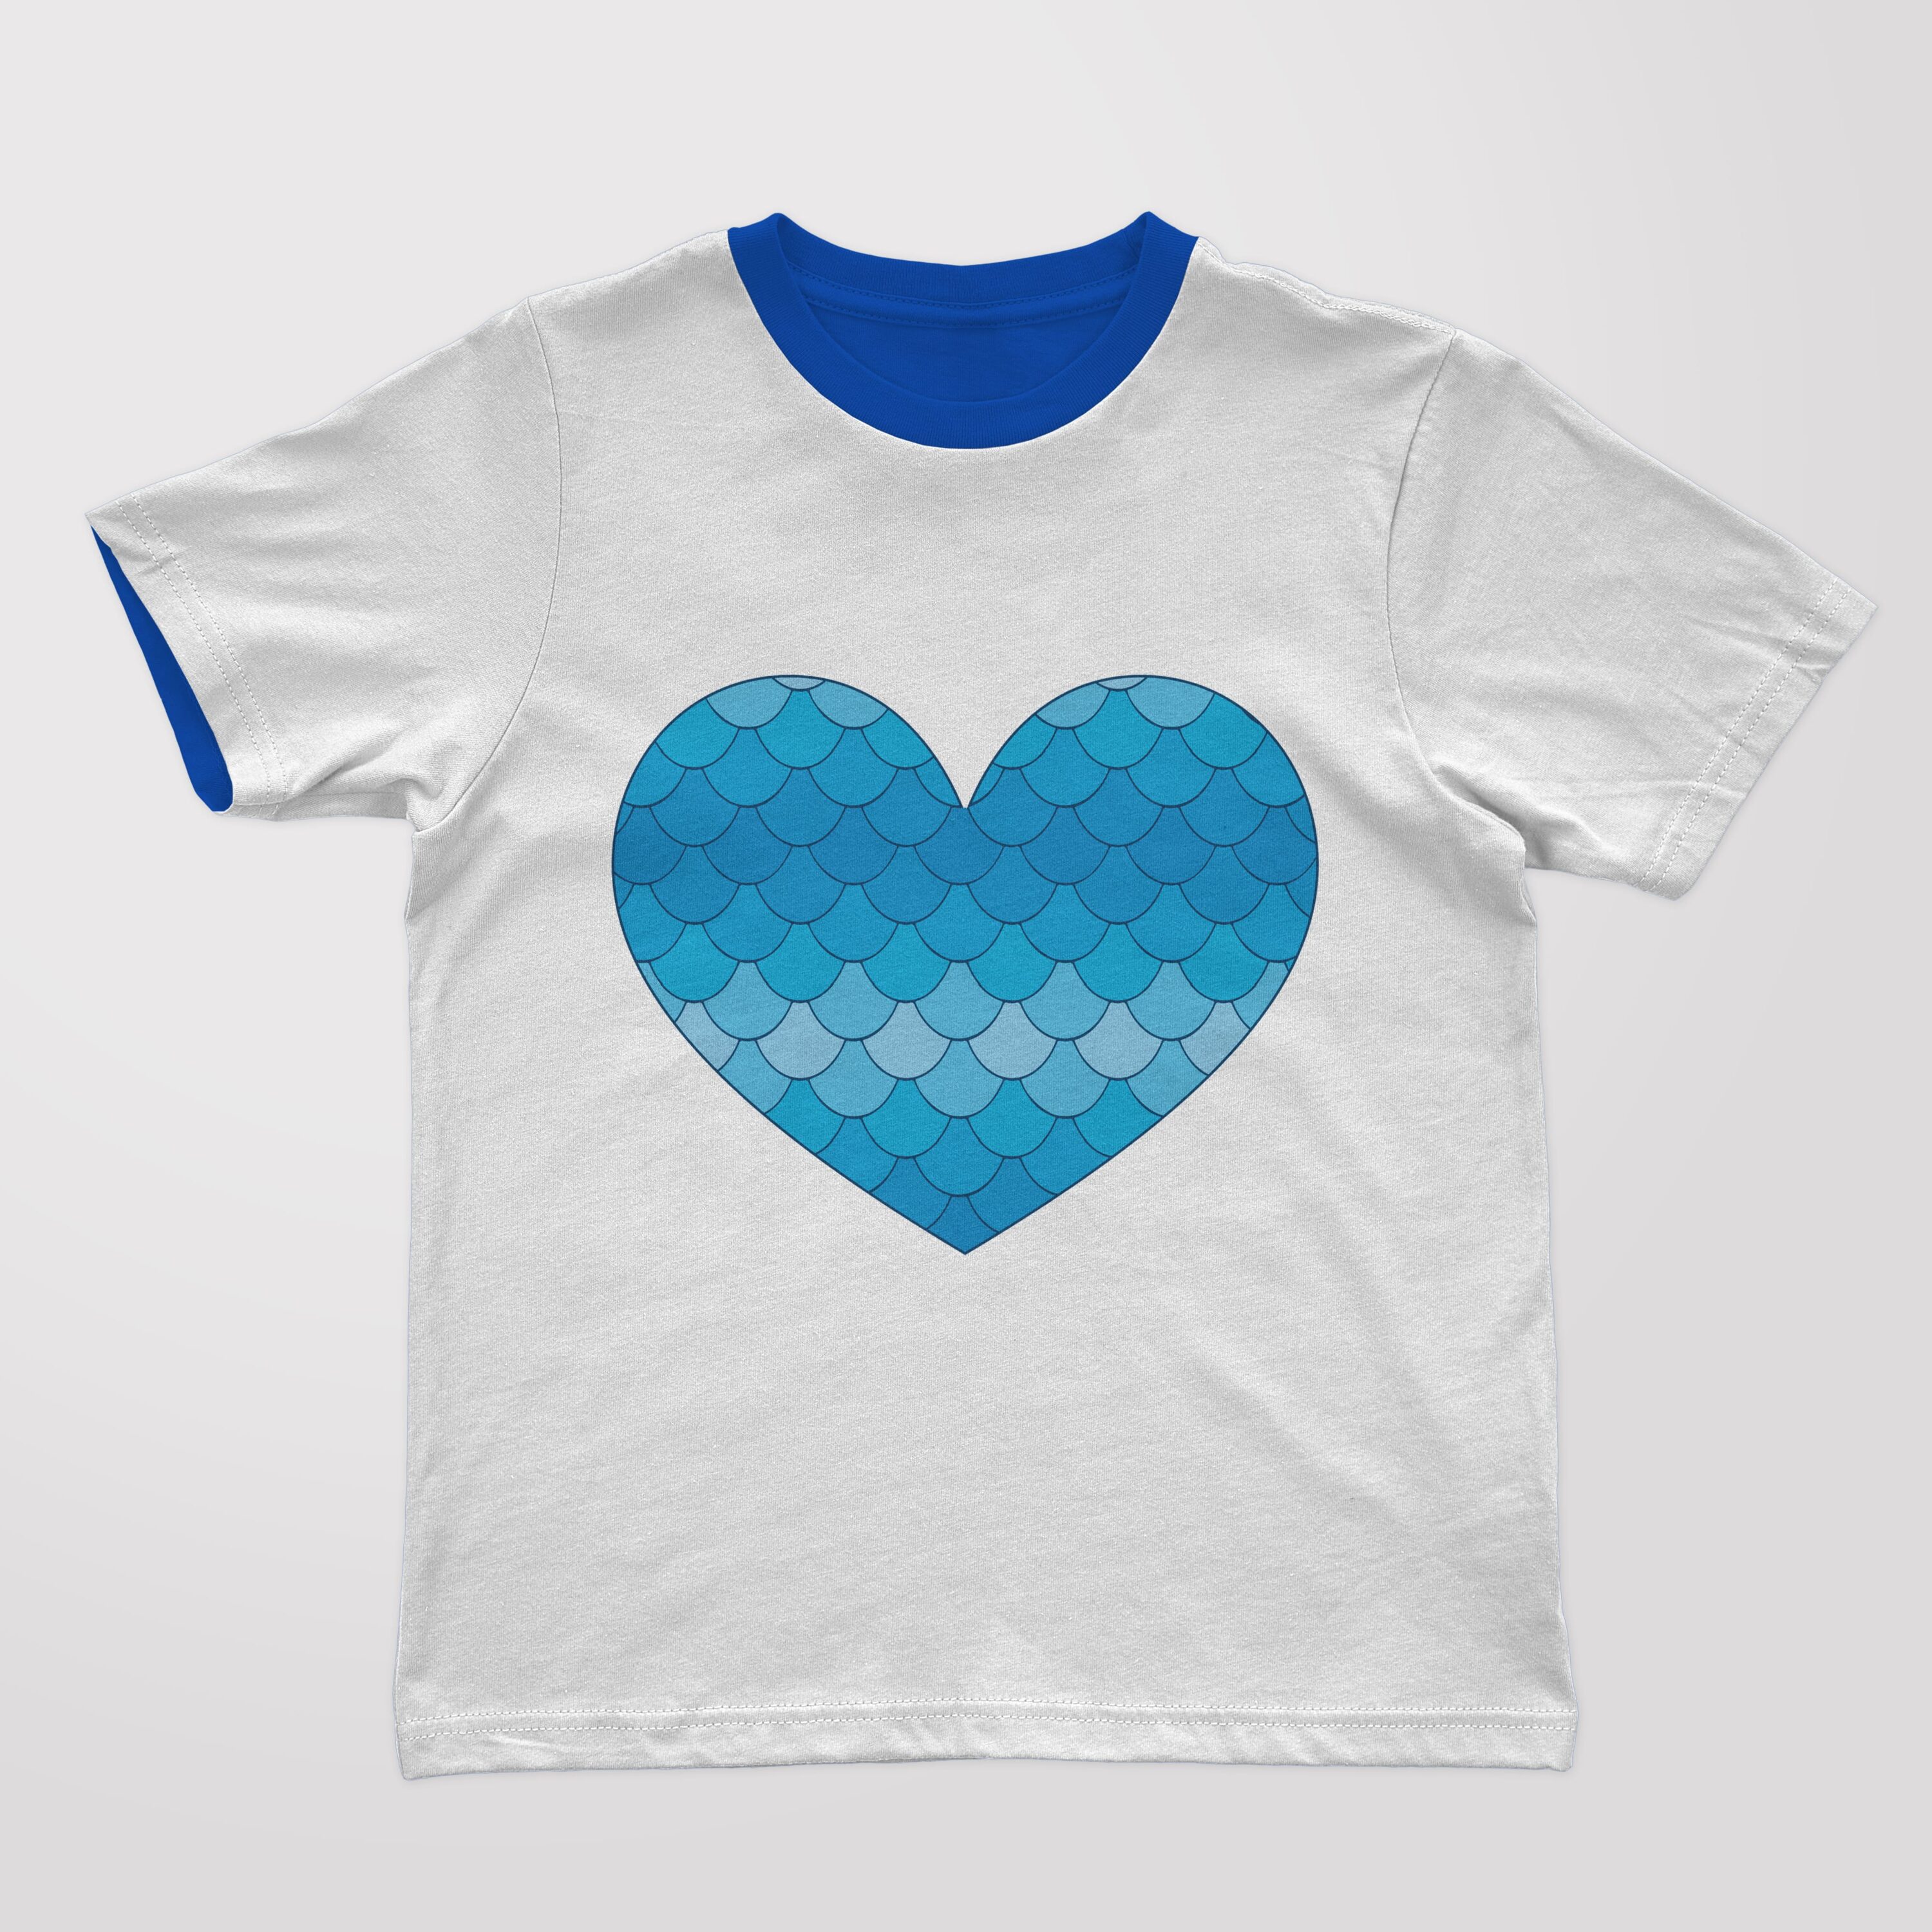 So cute light t-shirt with the blue heart.